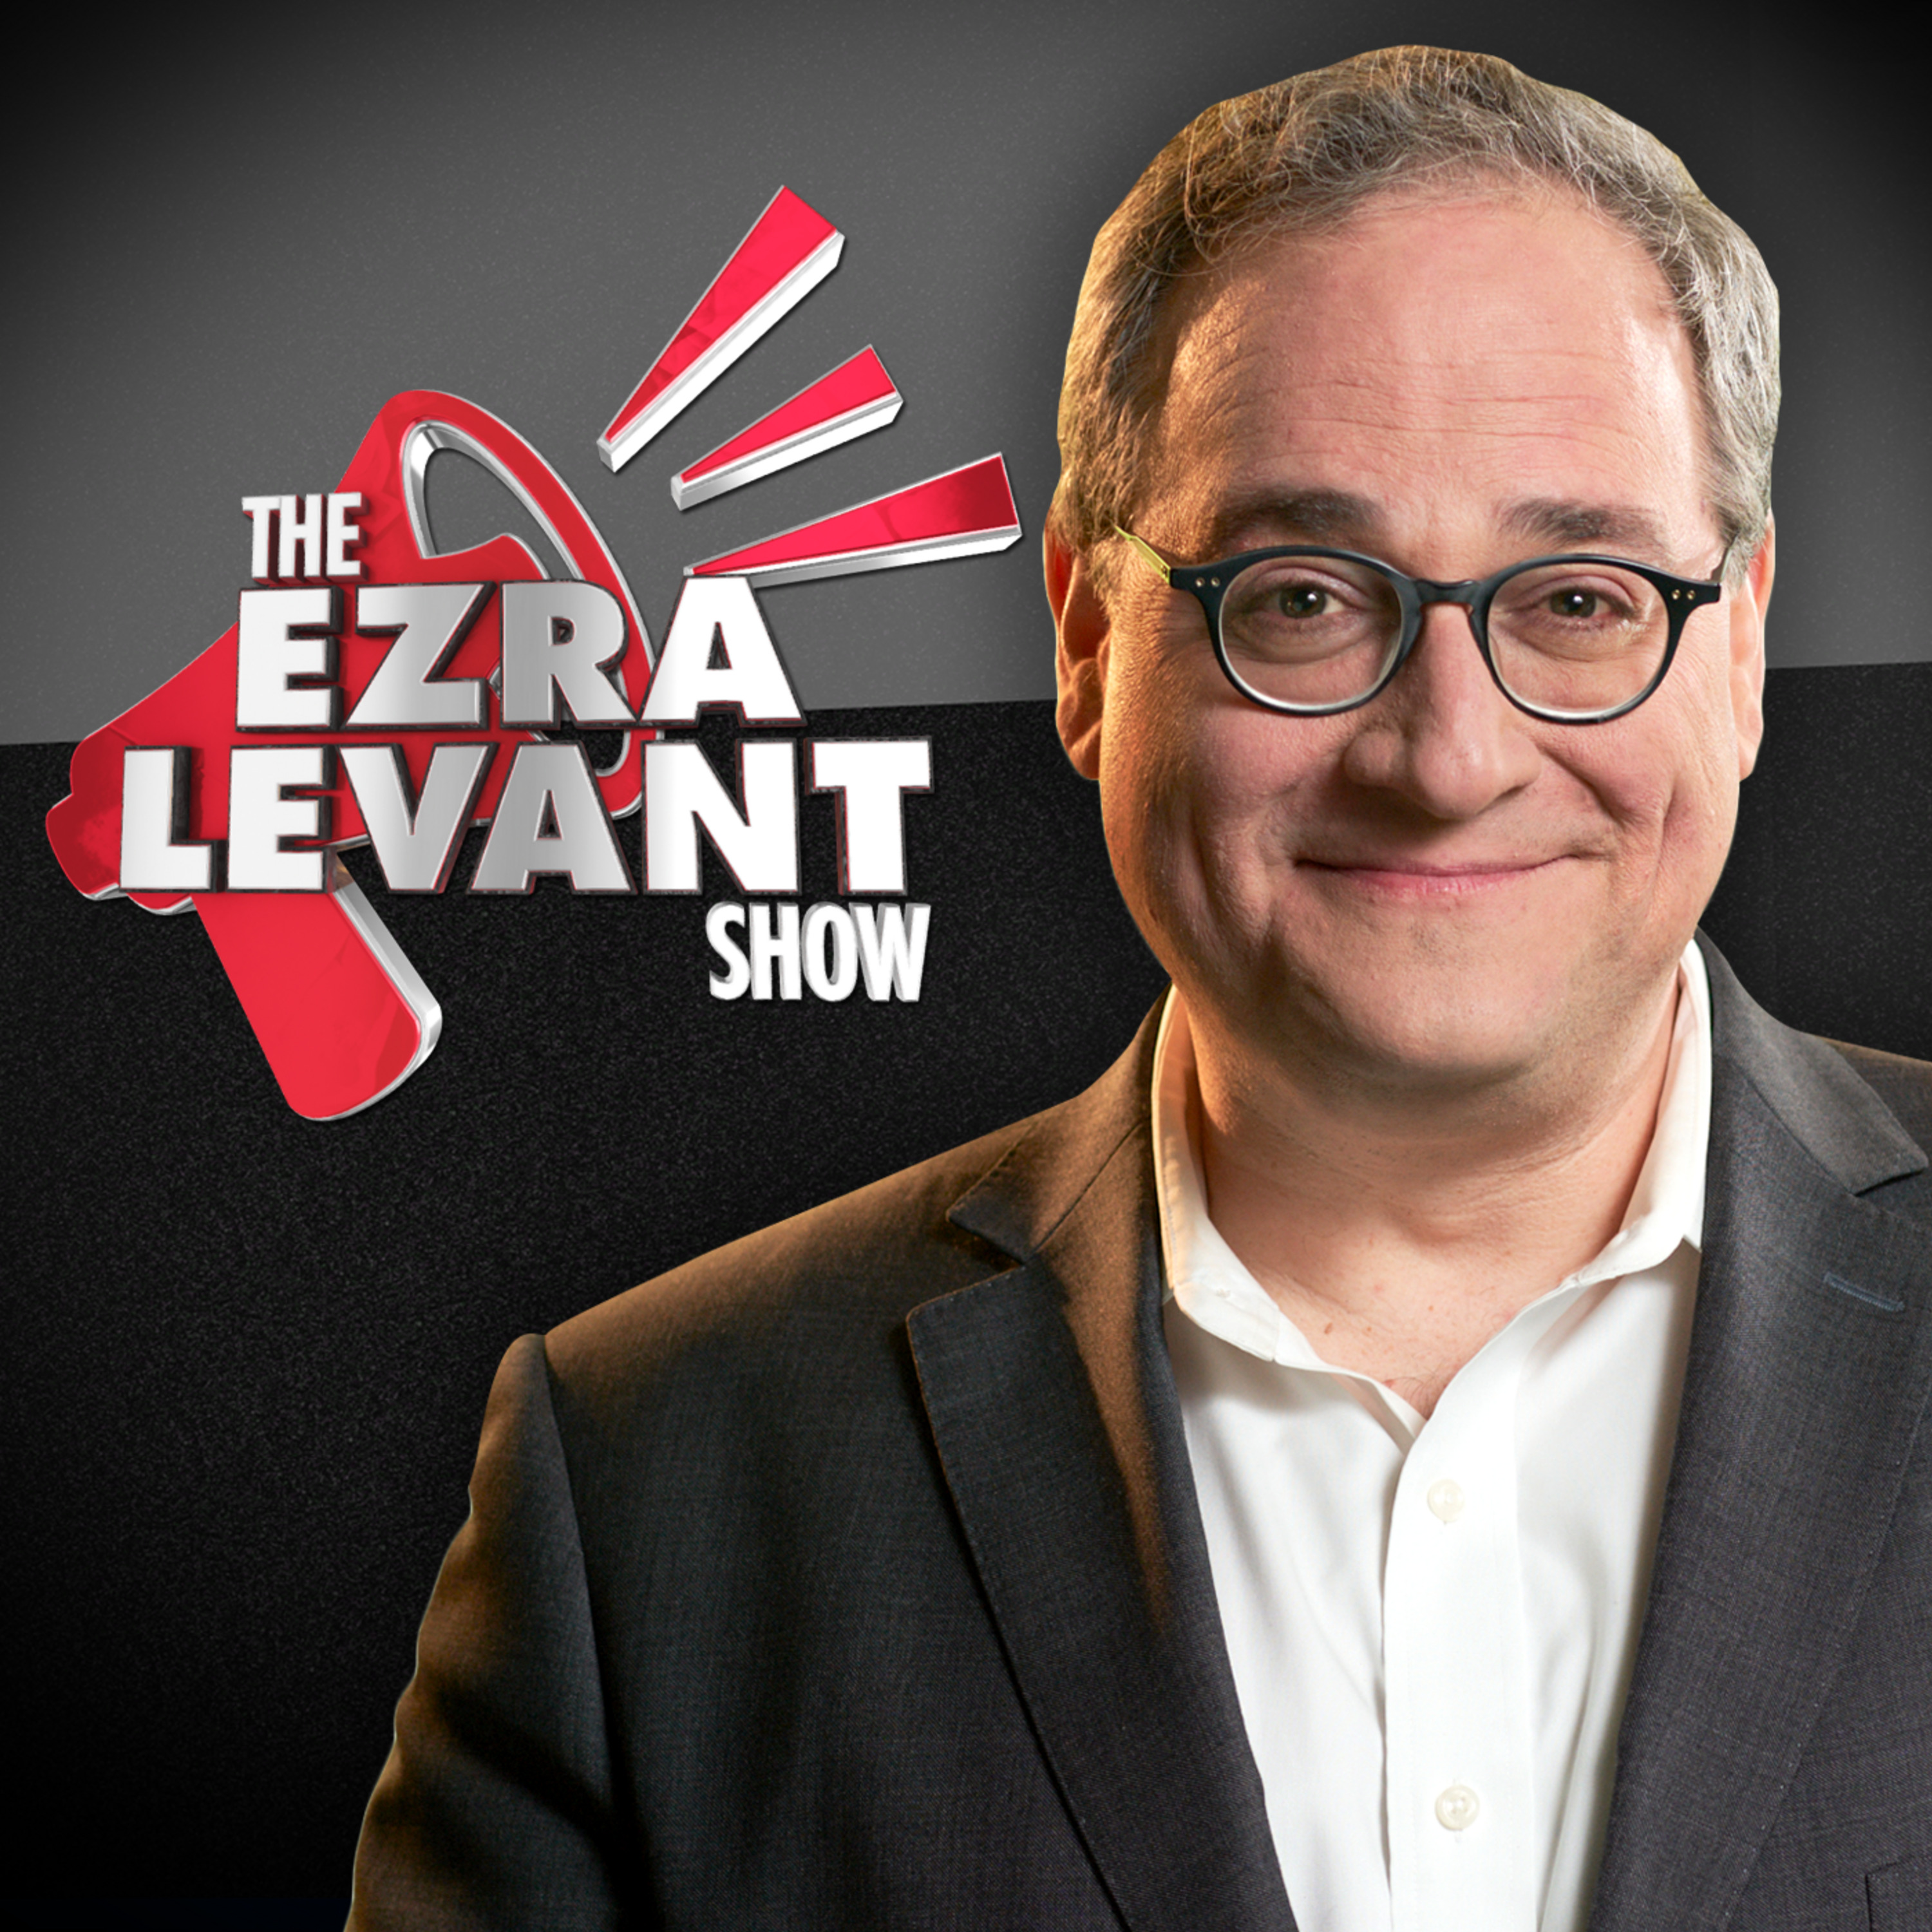 EZRA LEVANT | Is Trudeau going to put us back into some sort of lockdown? I’ll show you a recent comment he made